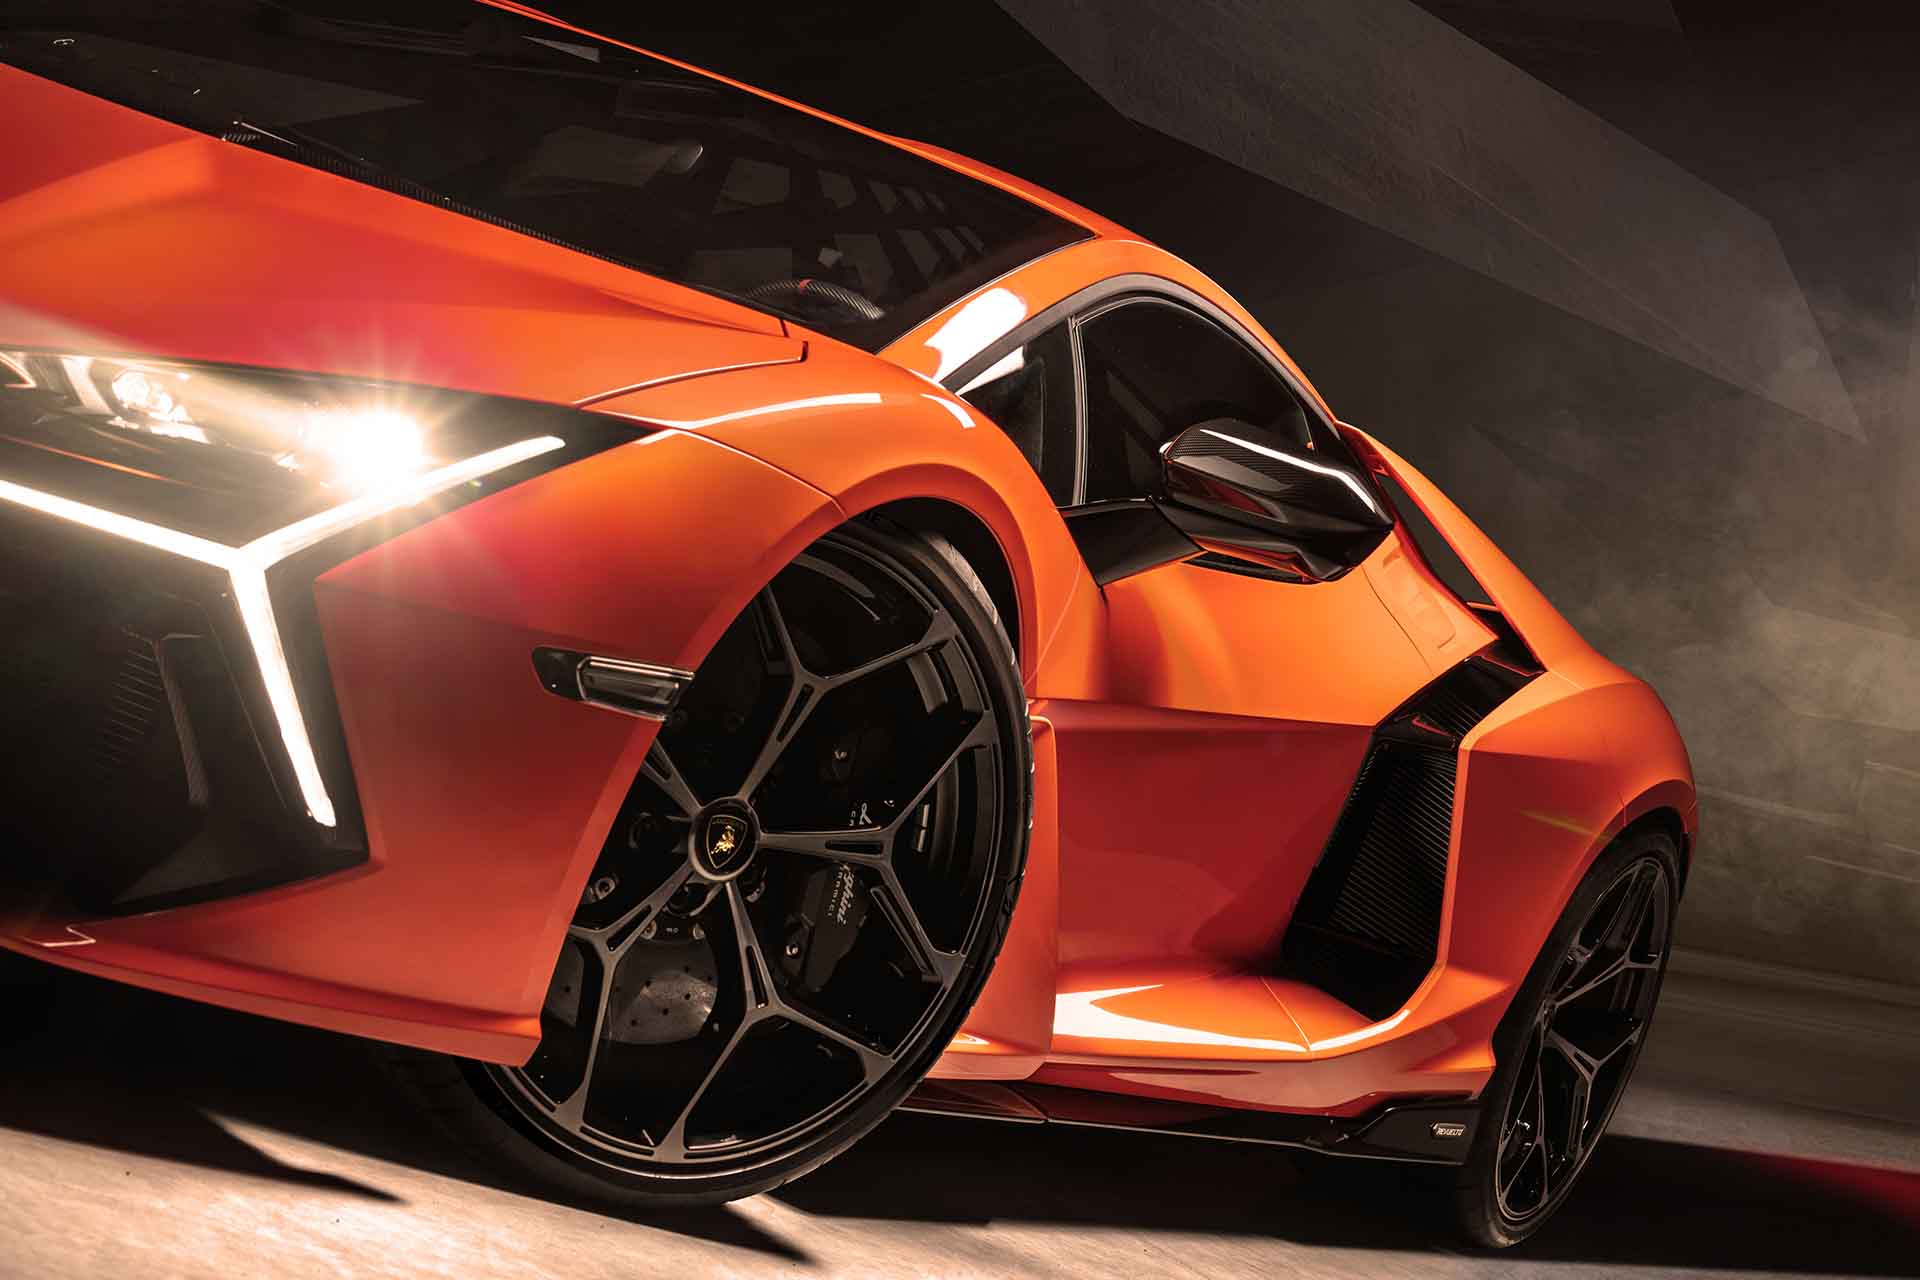 Photo of the flying buttress of an orange Lamborghini Revuelto supercar.